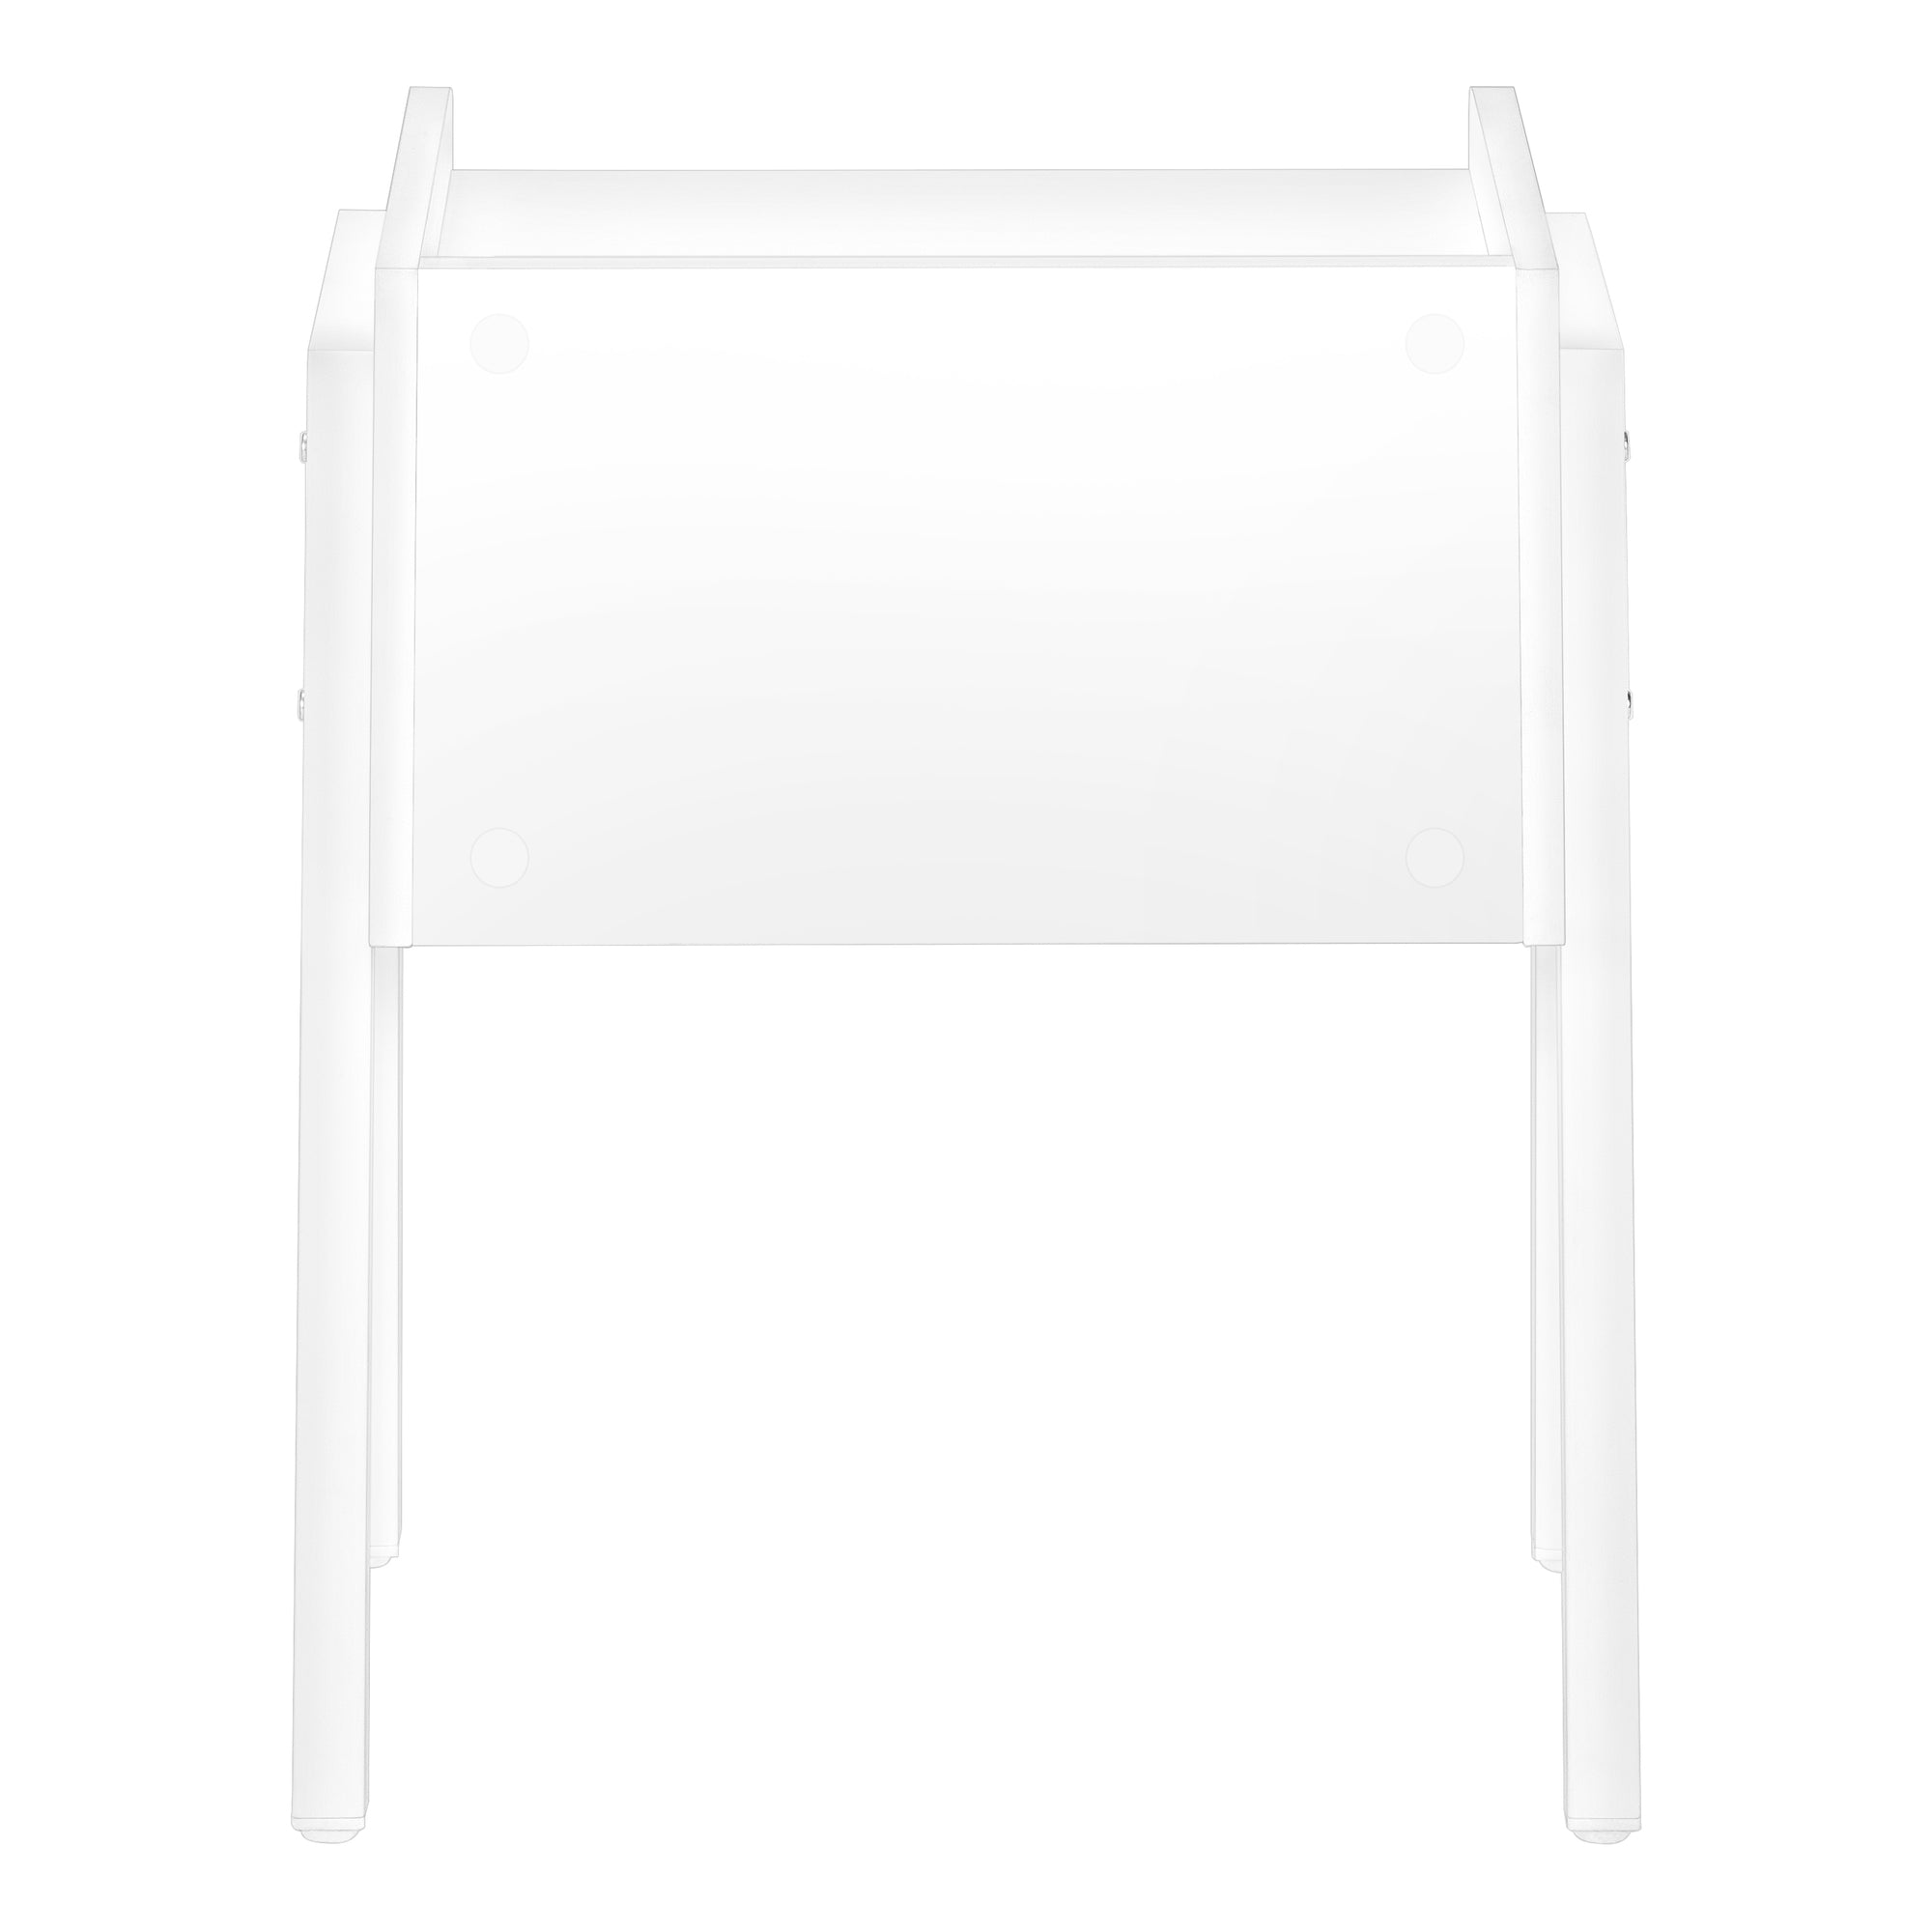 MN-523594    Accent Table, Side, End, Nightstand, Lamp, Living Room, Bedroom, Metal Legs, Laminate, White, Contemporary, Modern